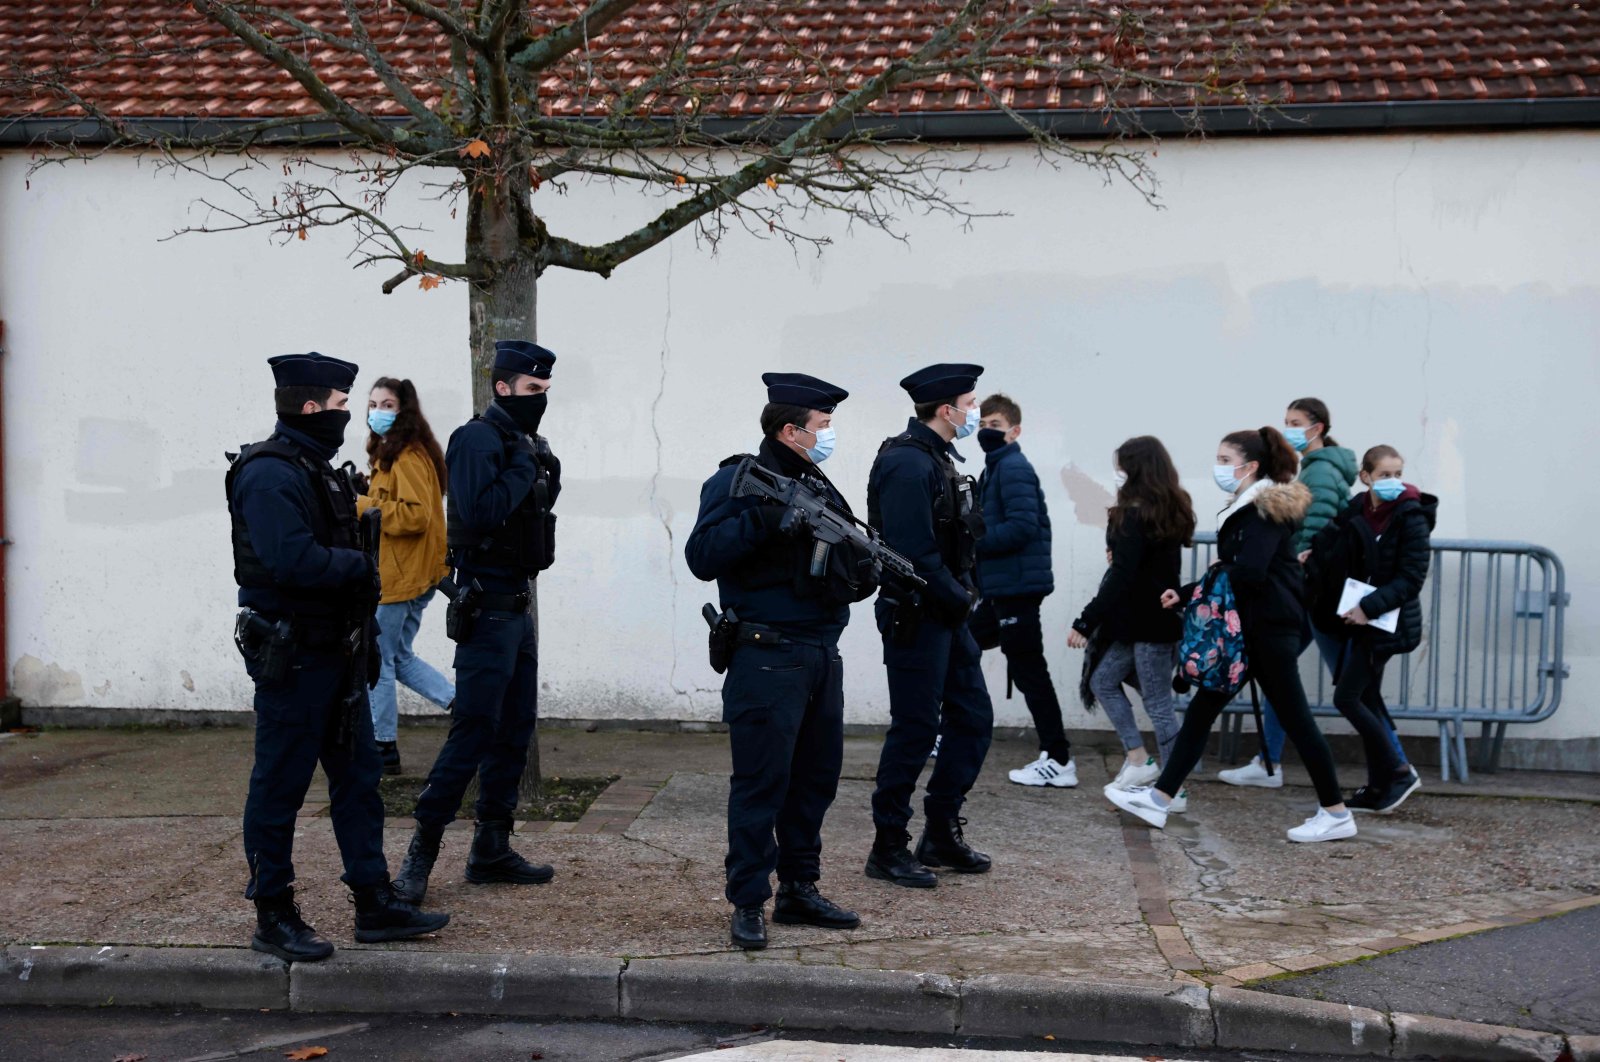 A French CRS (Compagnies Republicaines de Securite) police officer stands near the entrance of Le Bois d'Aulne middle school in Conflans-Sainte-Honorine, Nov. 3, 2020. (AFP Photo)